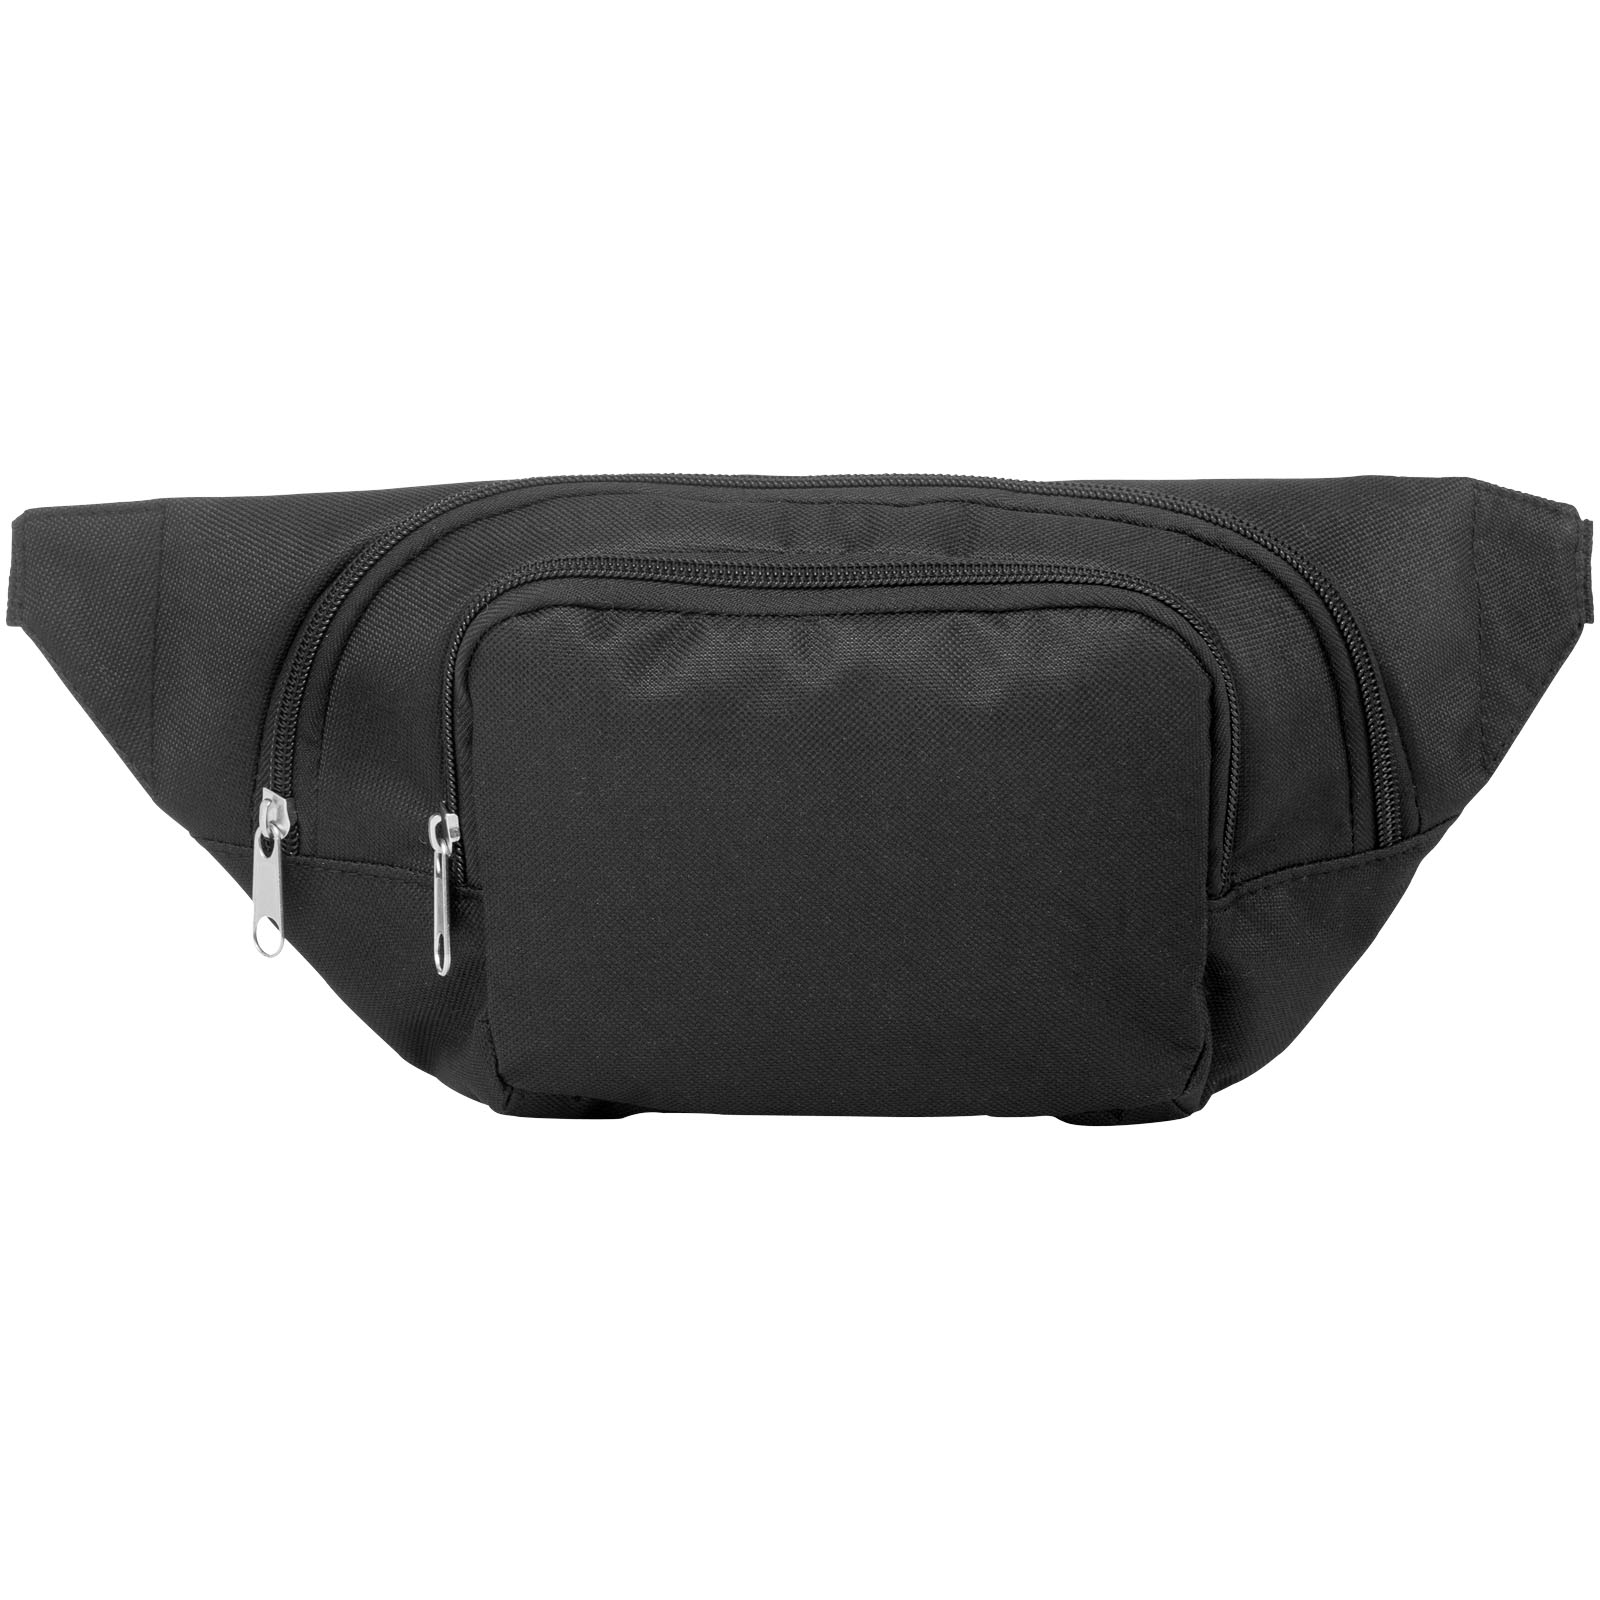 Advertising Travel Accessories - Santander fanny pack with two compartments - 1